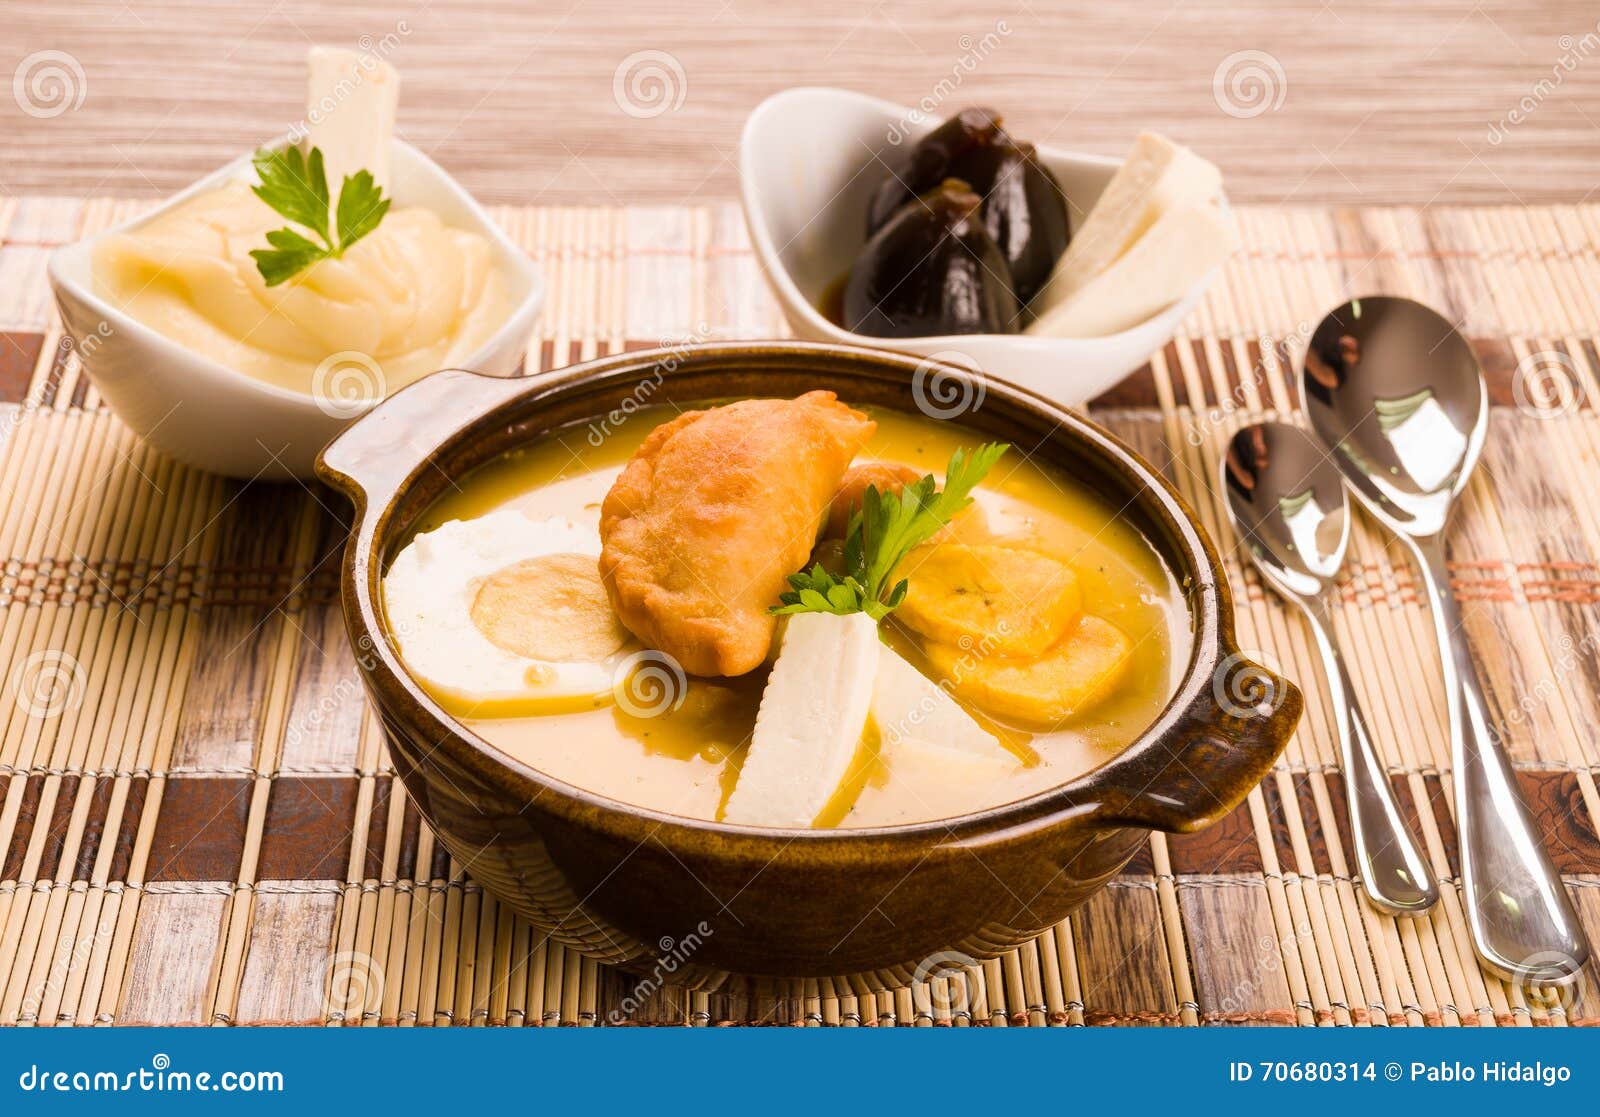 https://thumbs.dreamstime.com/z/elegant-table-setting-full-serving-traditional-fanesca-soup-accessories-70680314.jpg